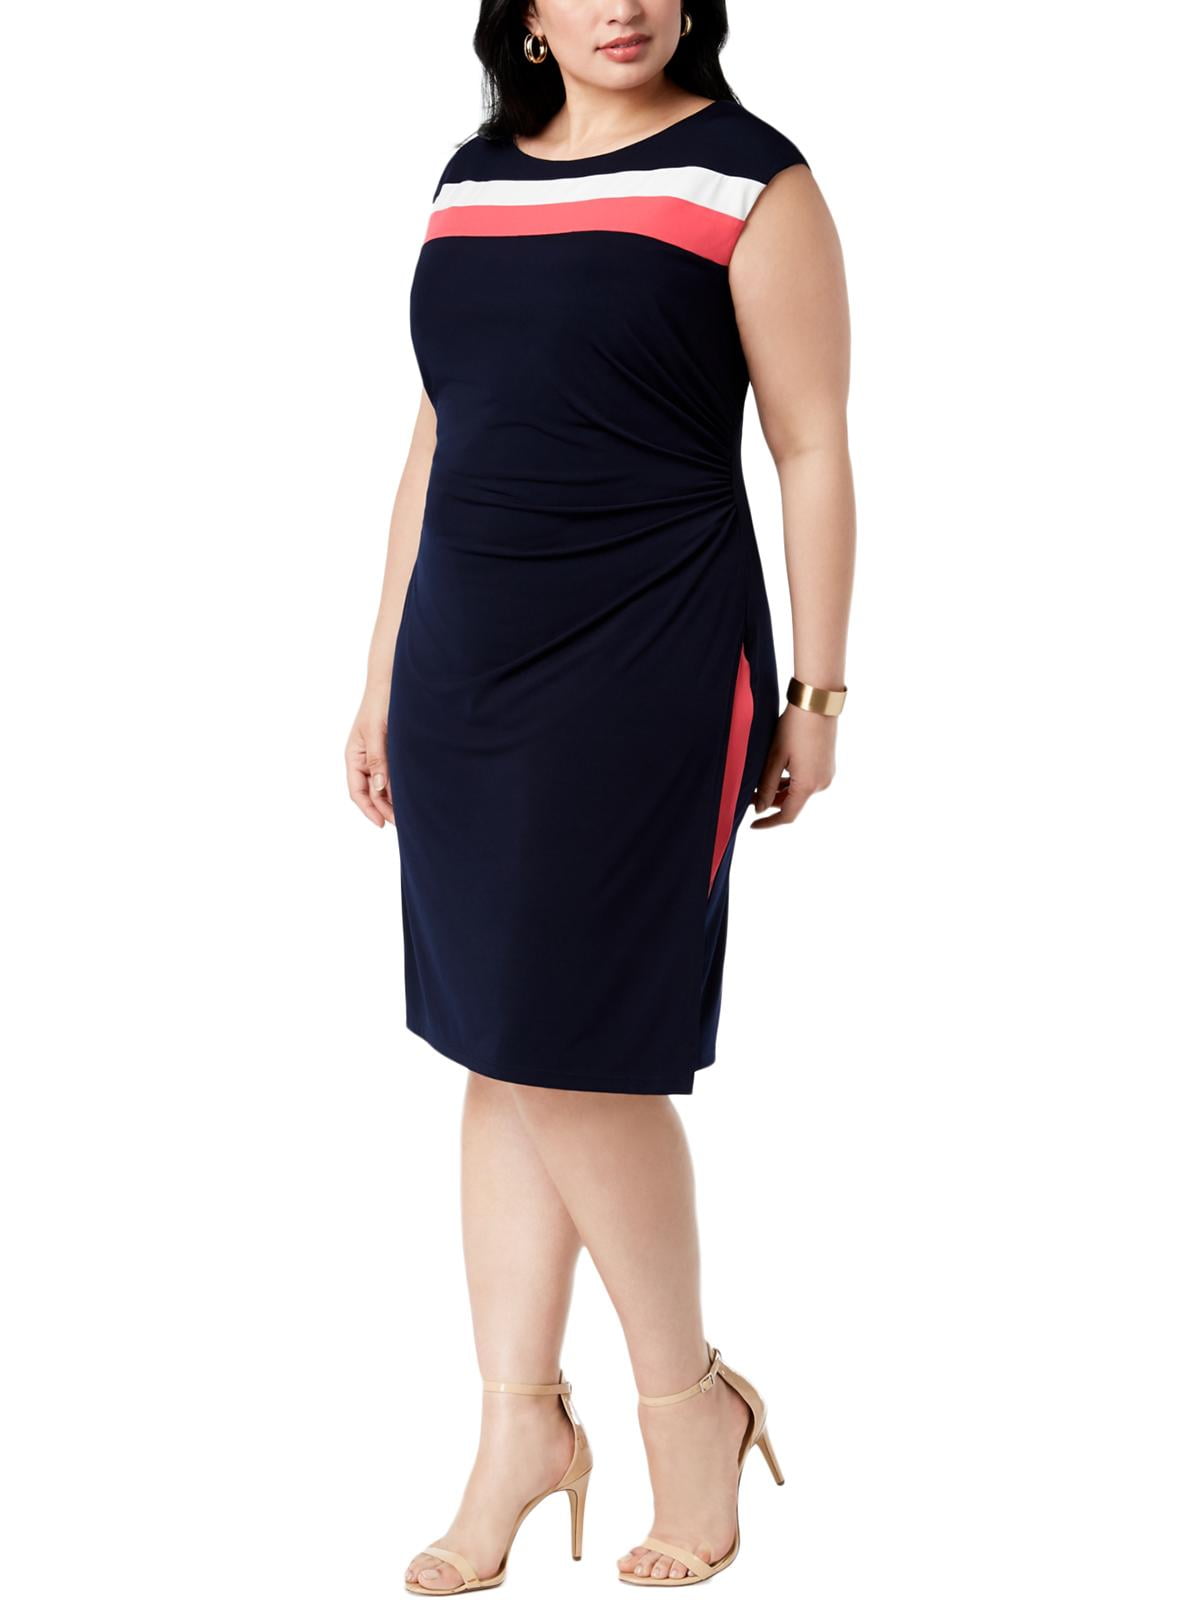 Connected Womens Dress Plus Size Printed Tiered Sheath Dress Striped Blue $79 